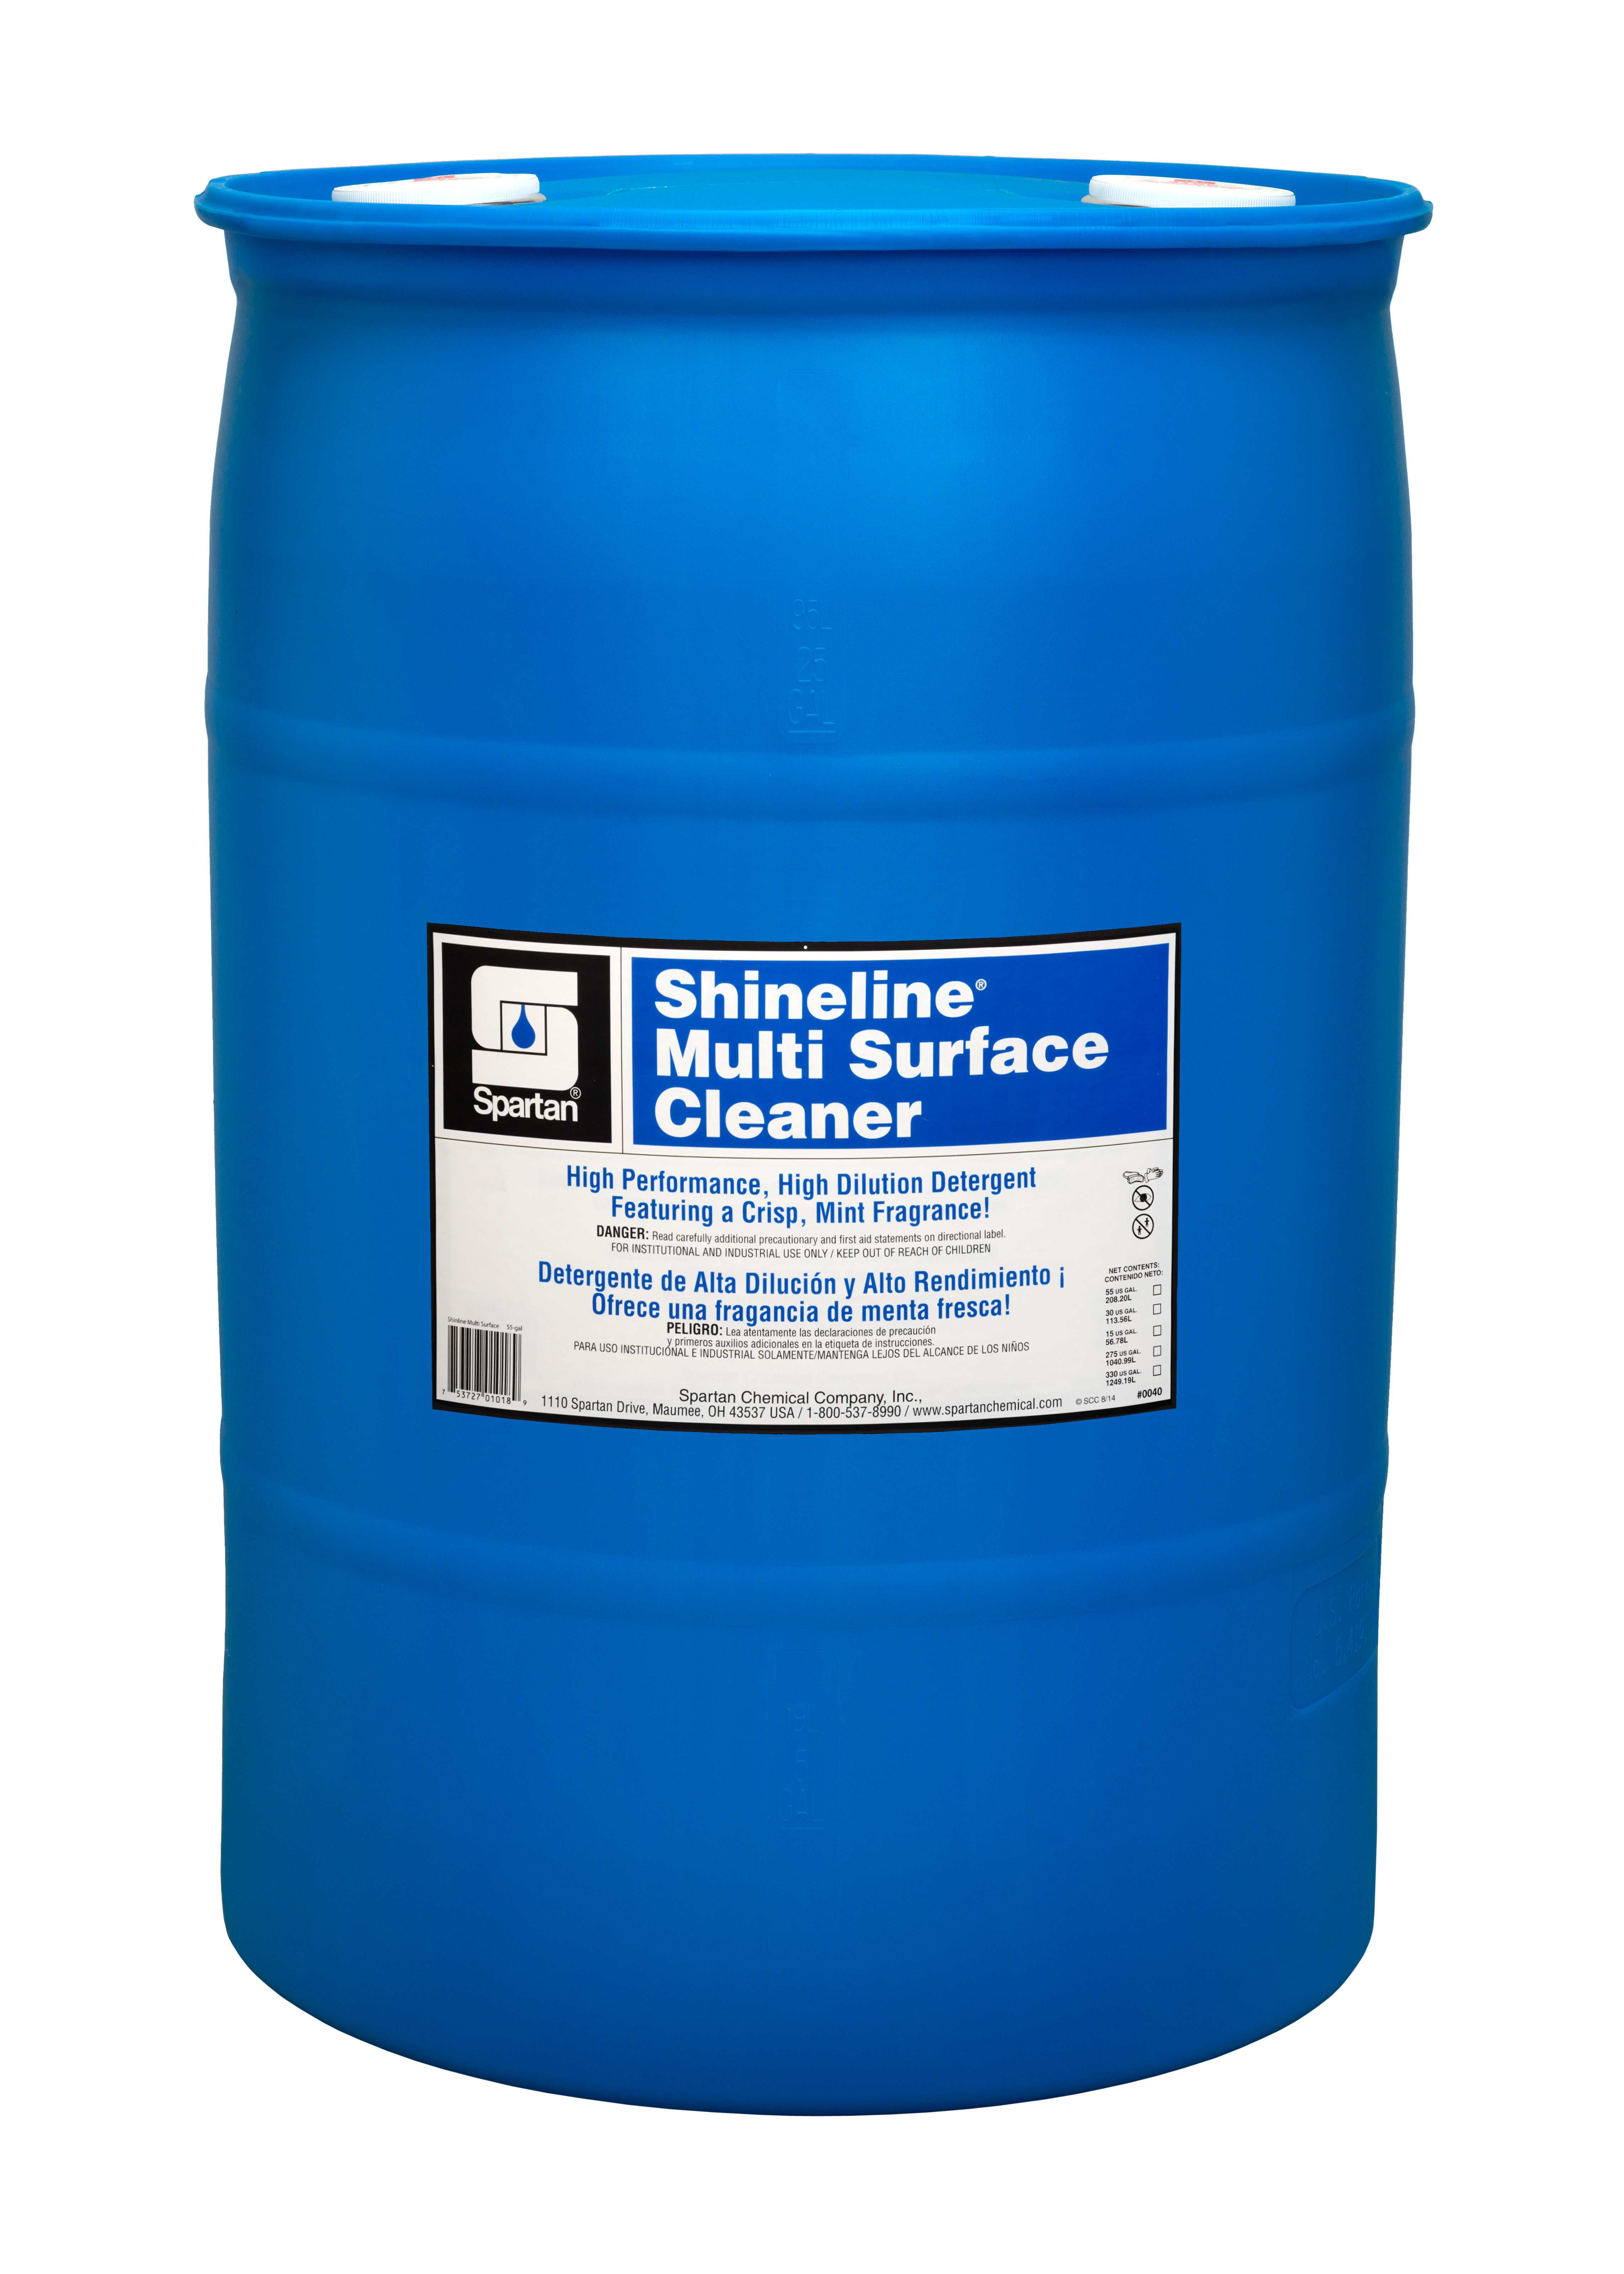 Spartan Chemical Company Shineline Multi Surface Cleaner, 30 GAL DRUM